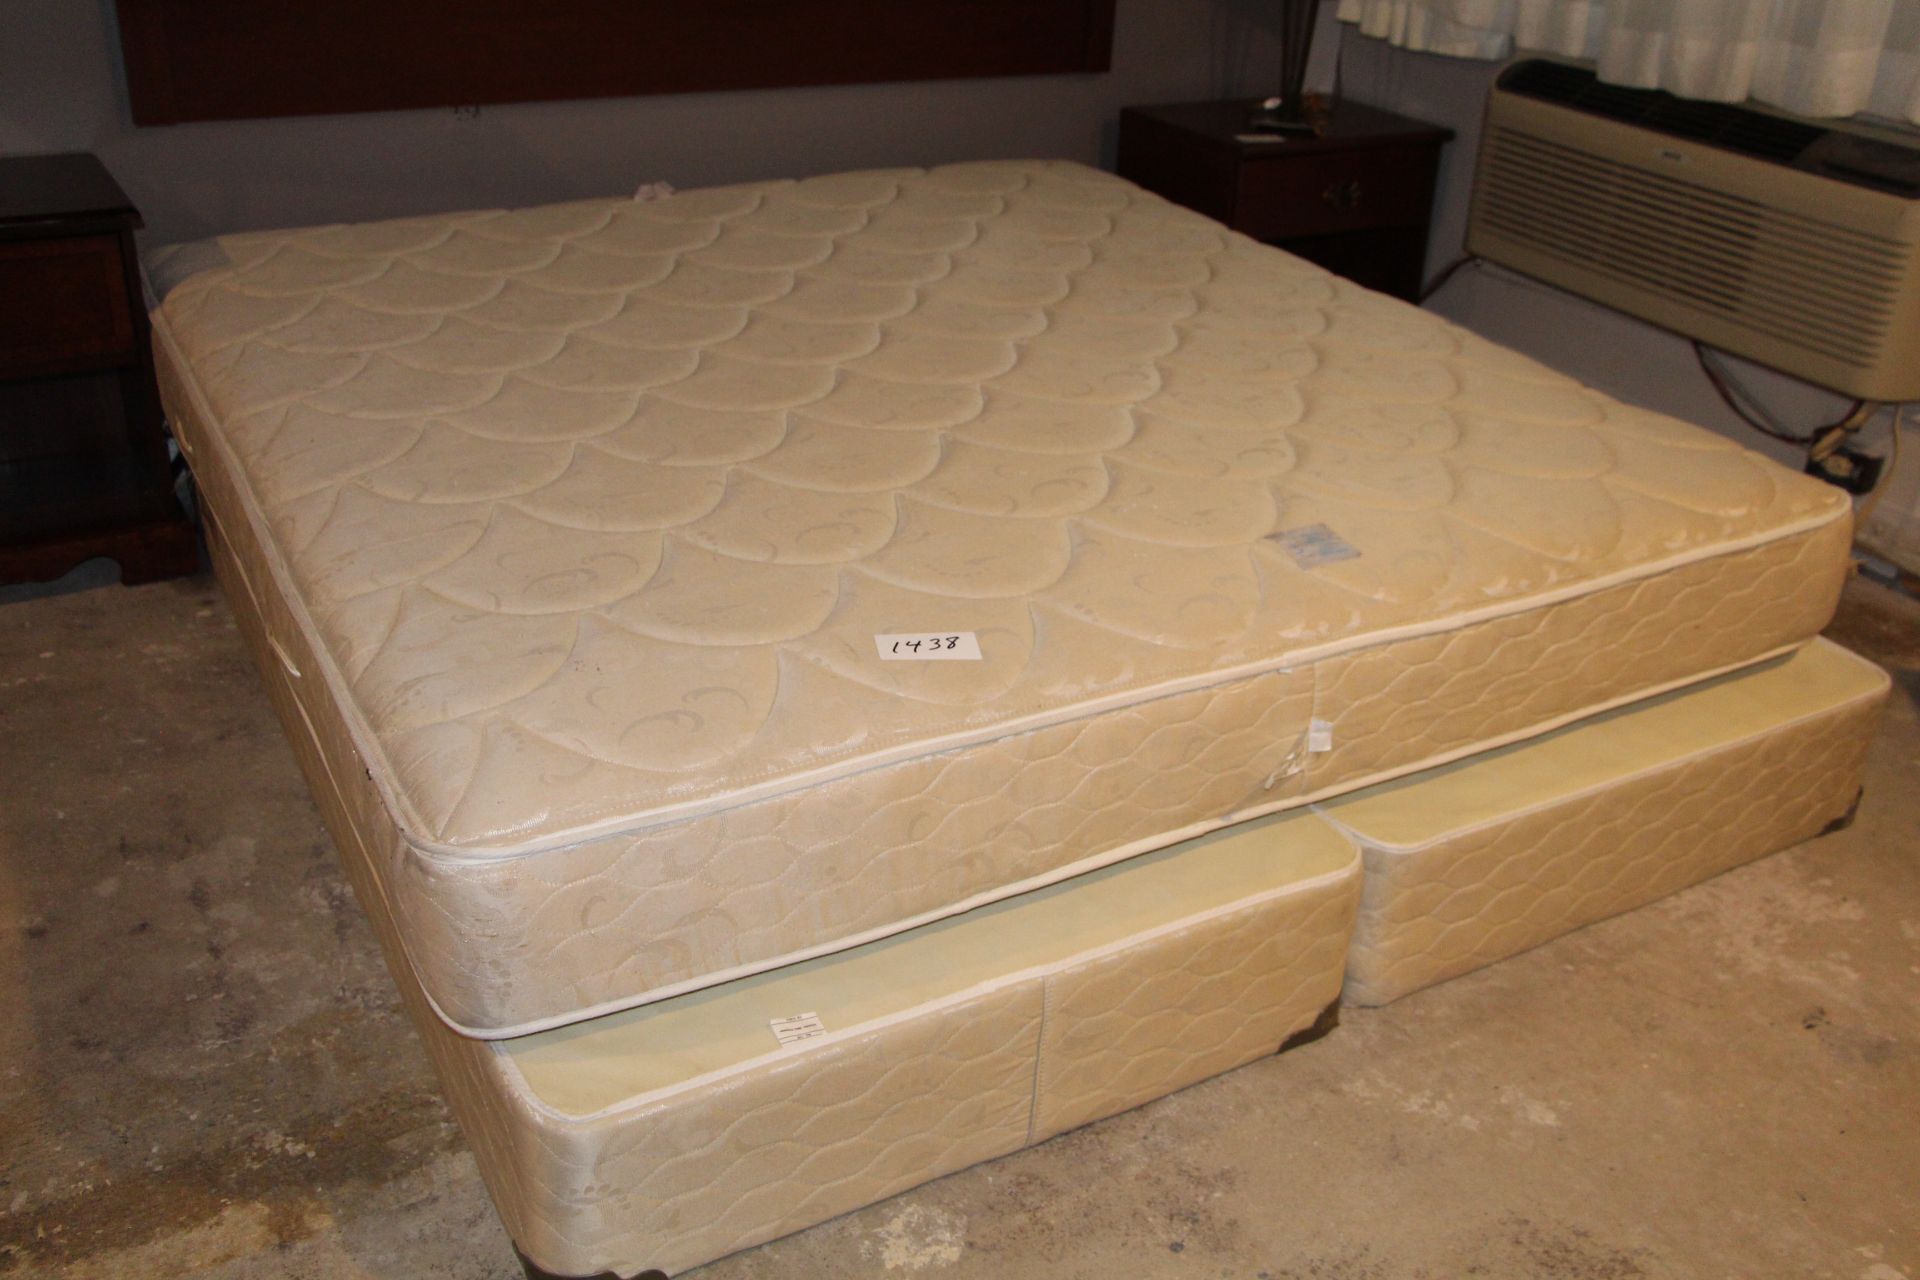 King size mattress with box spring